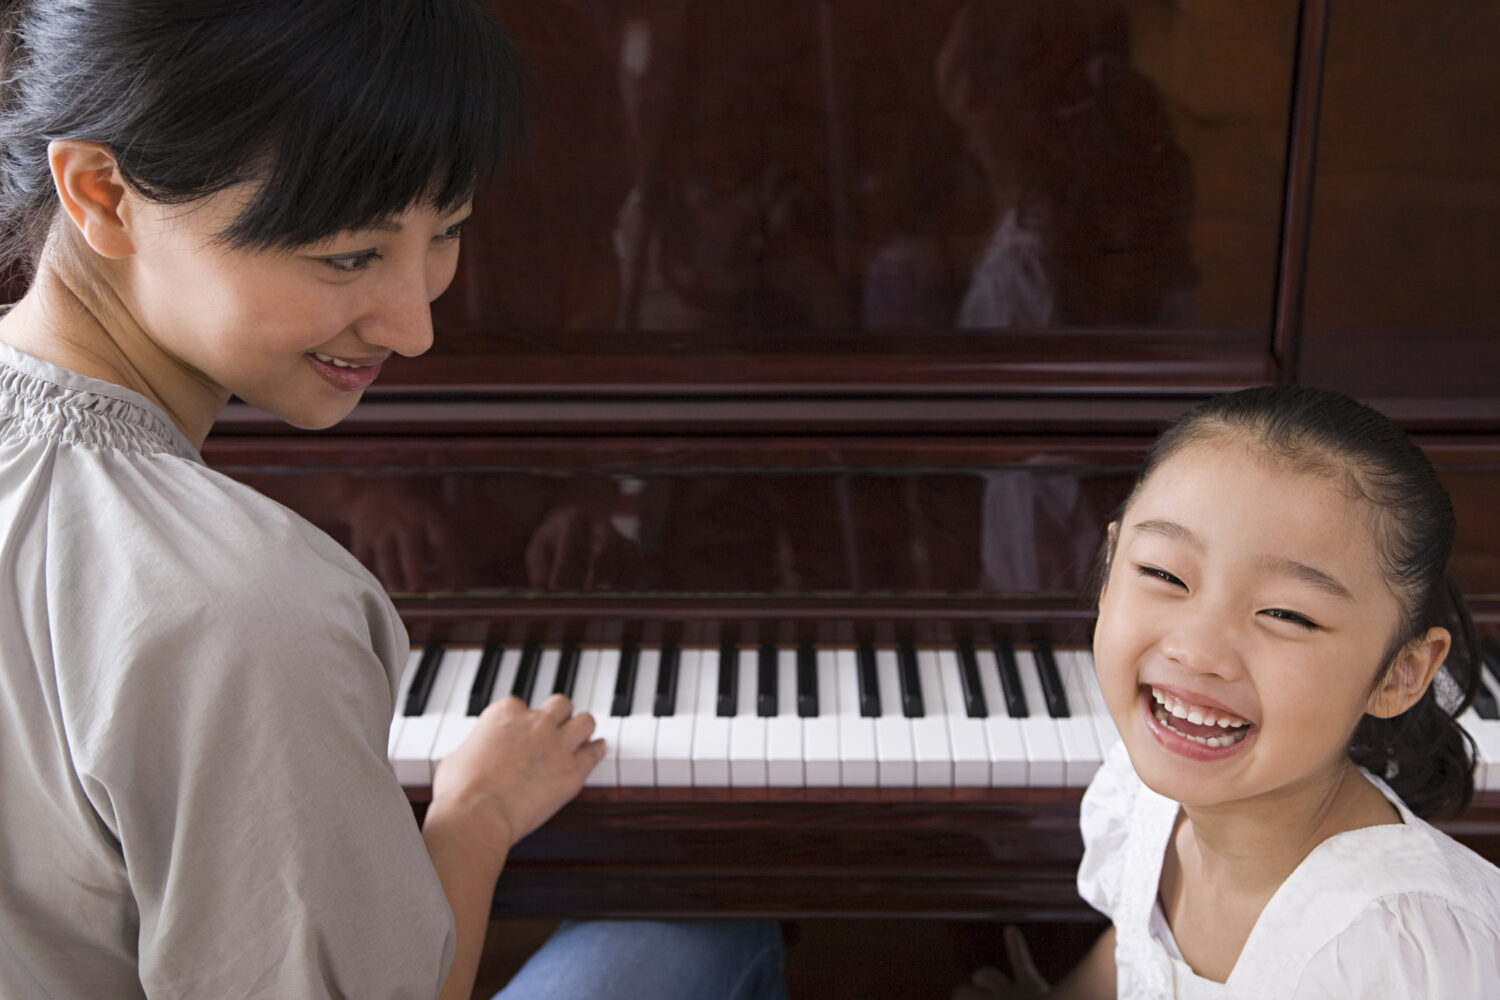 Ideas for an easy Singing Time without a Pianist! Have you ever had a last minute cancellation from your pianist and wondered what to do? Here are 6 easy ideas to help you have a wonderful singing time, even without the help of a piano accompaniment. 